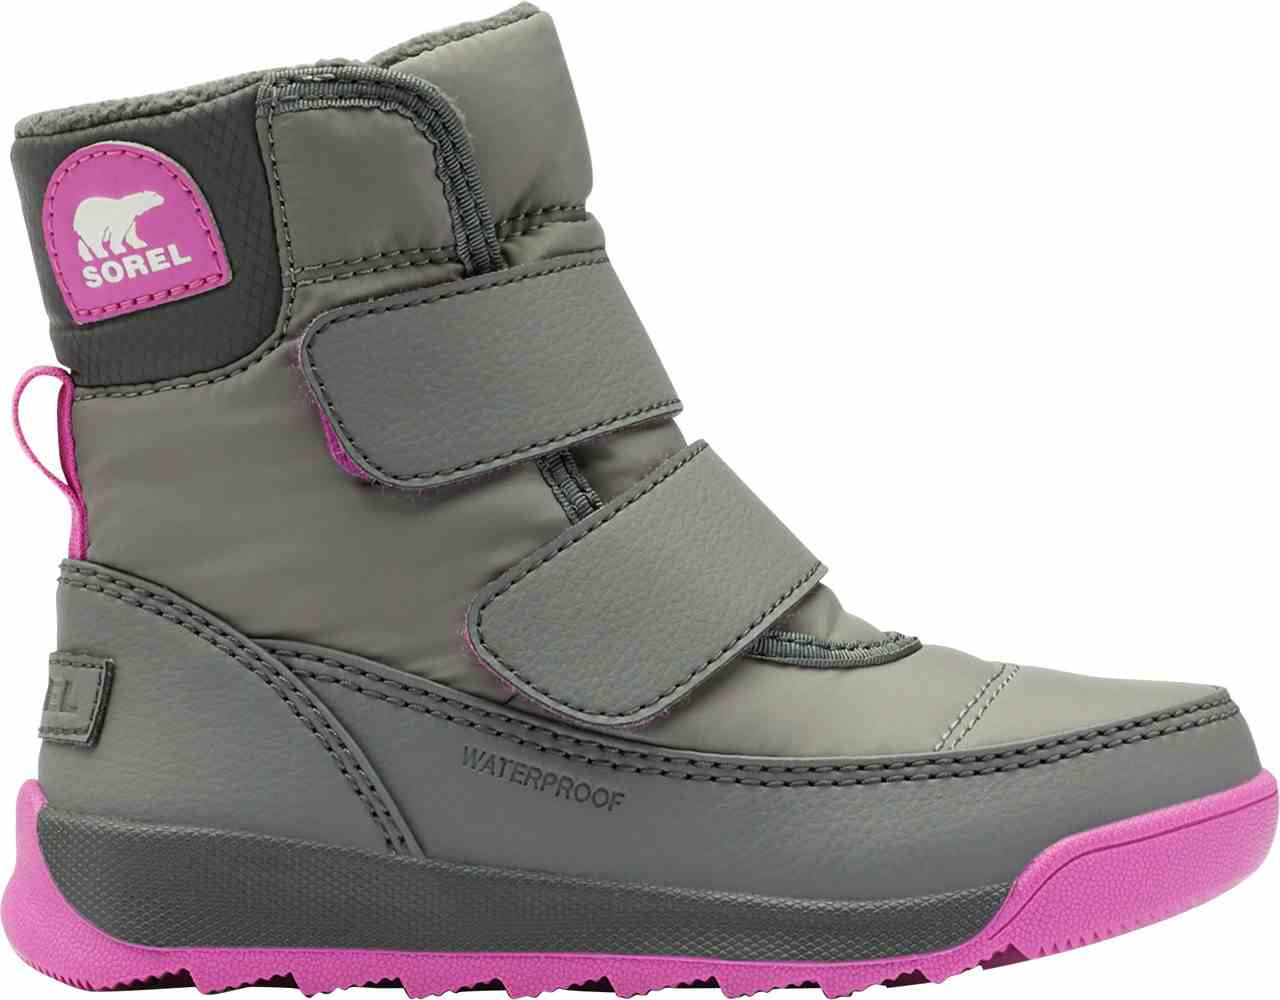 Whitney II Strap Boots Quarry/Grill